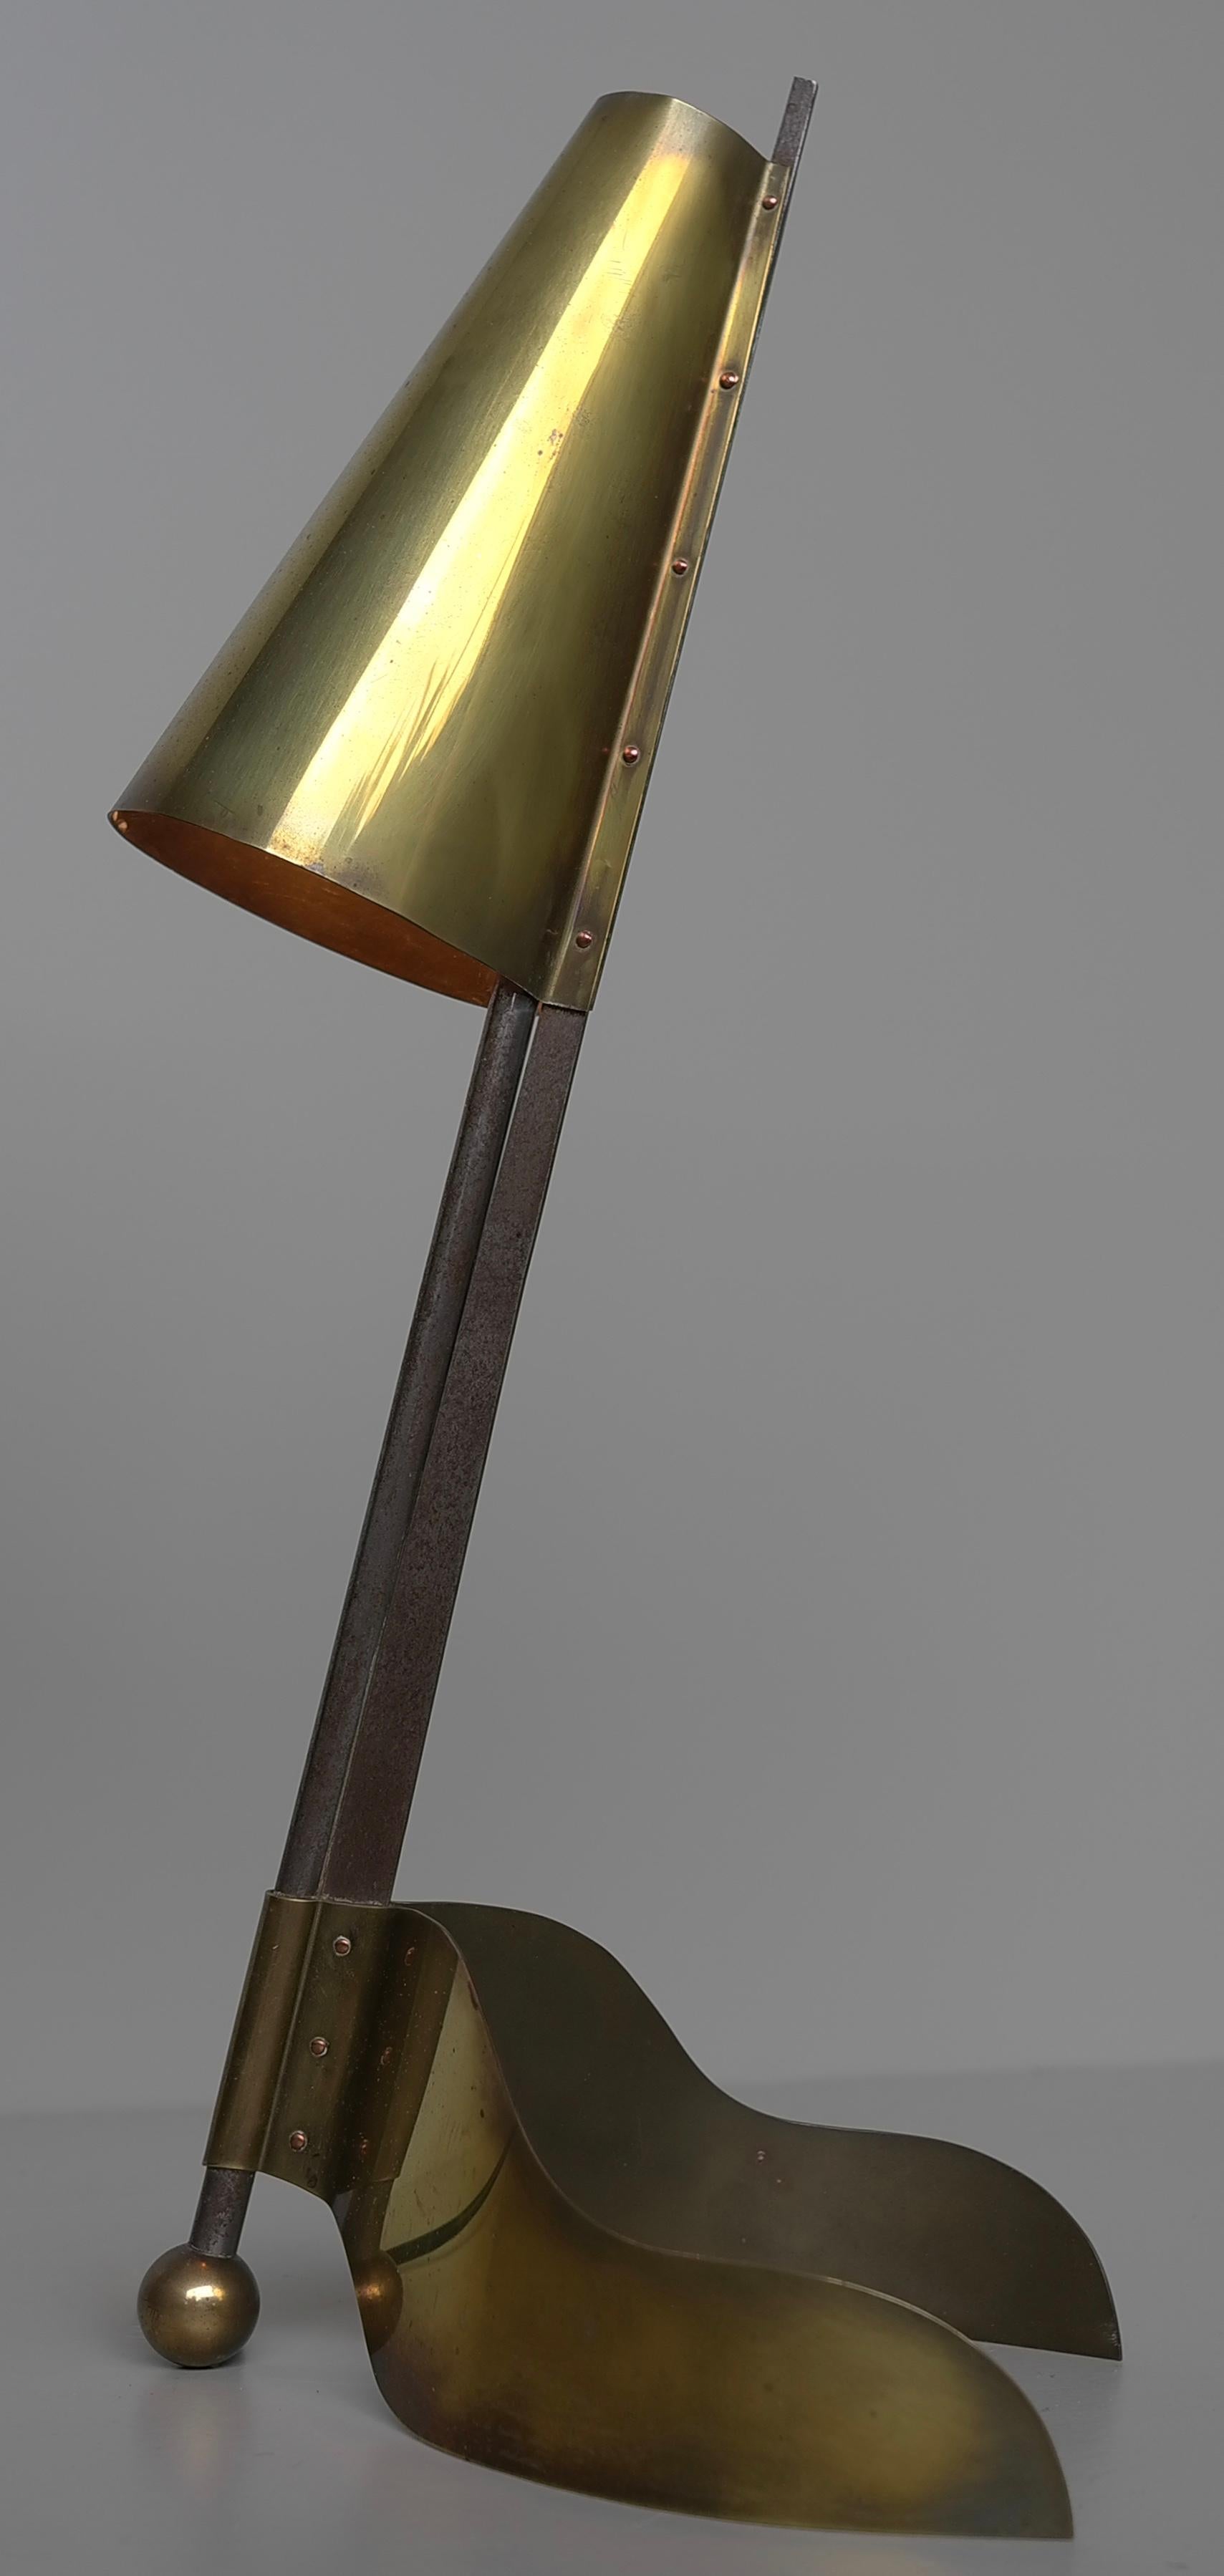 Architect table lamp, Sculptural shaped Copper and Steel, 1930's. We have had this lamp in our private collection and never found the exact history around it. Its one of the most amazing table lamps we have ever came across. Gives a warm orange glow